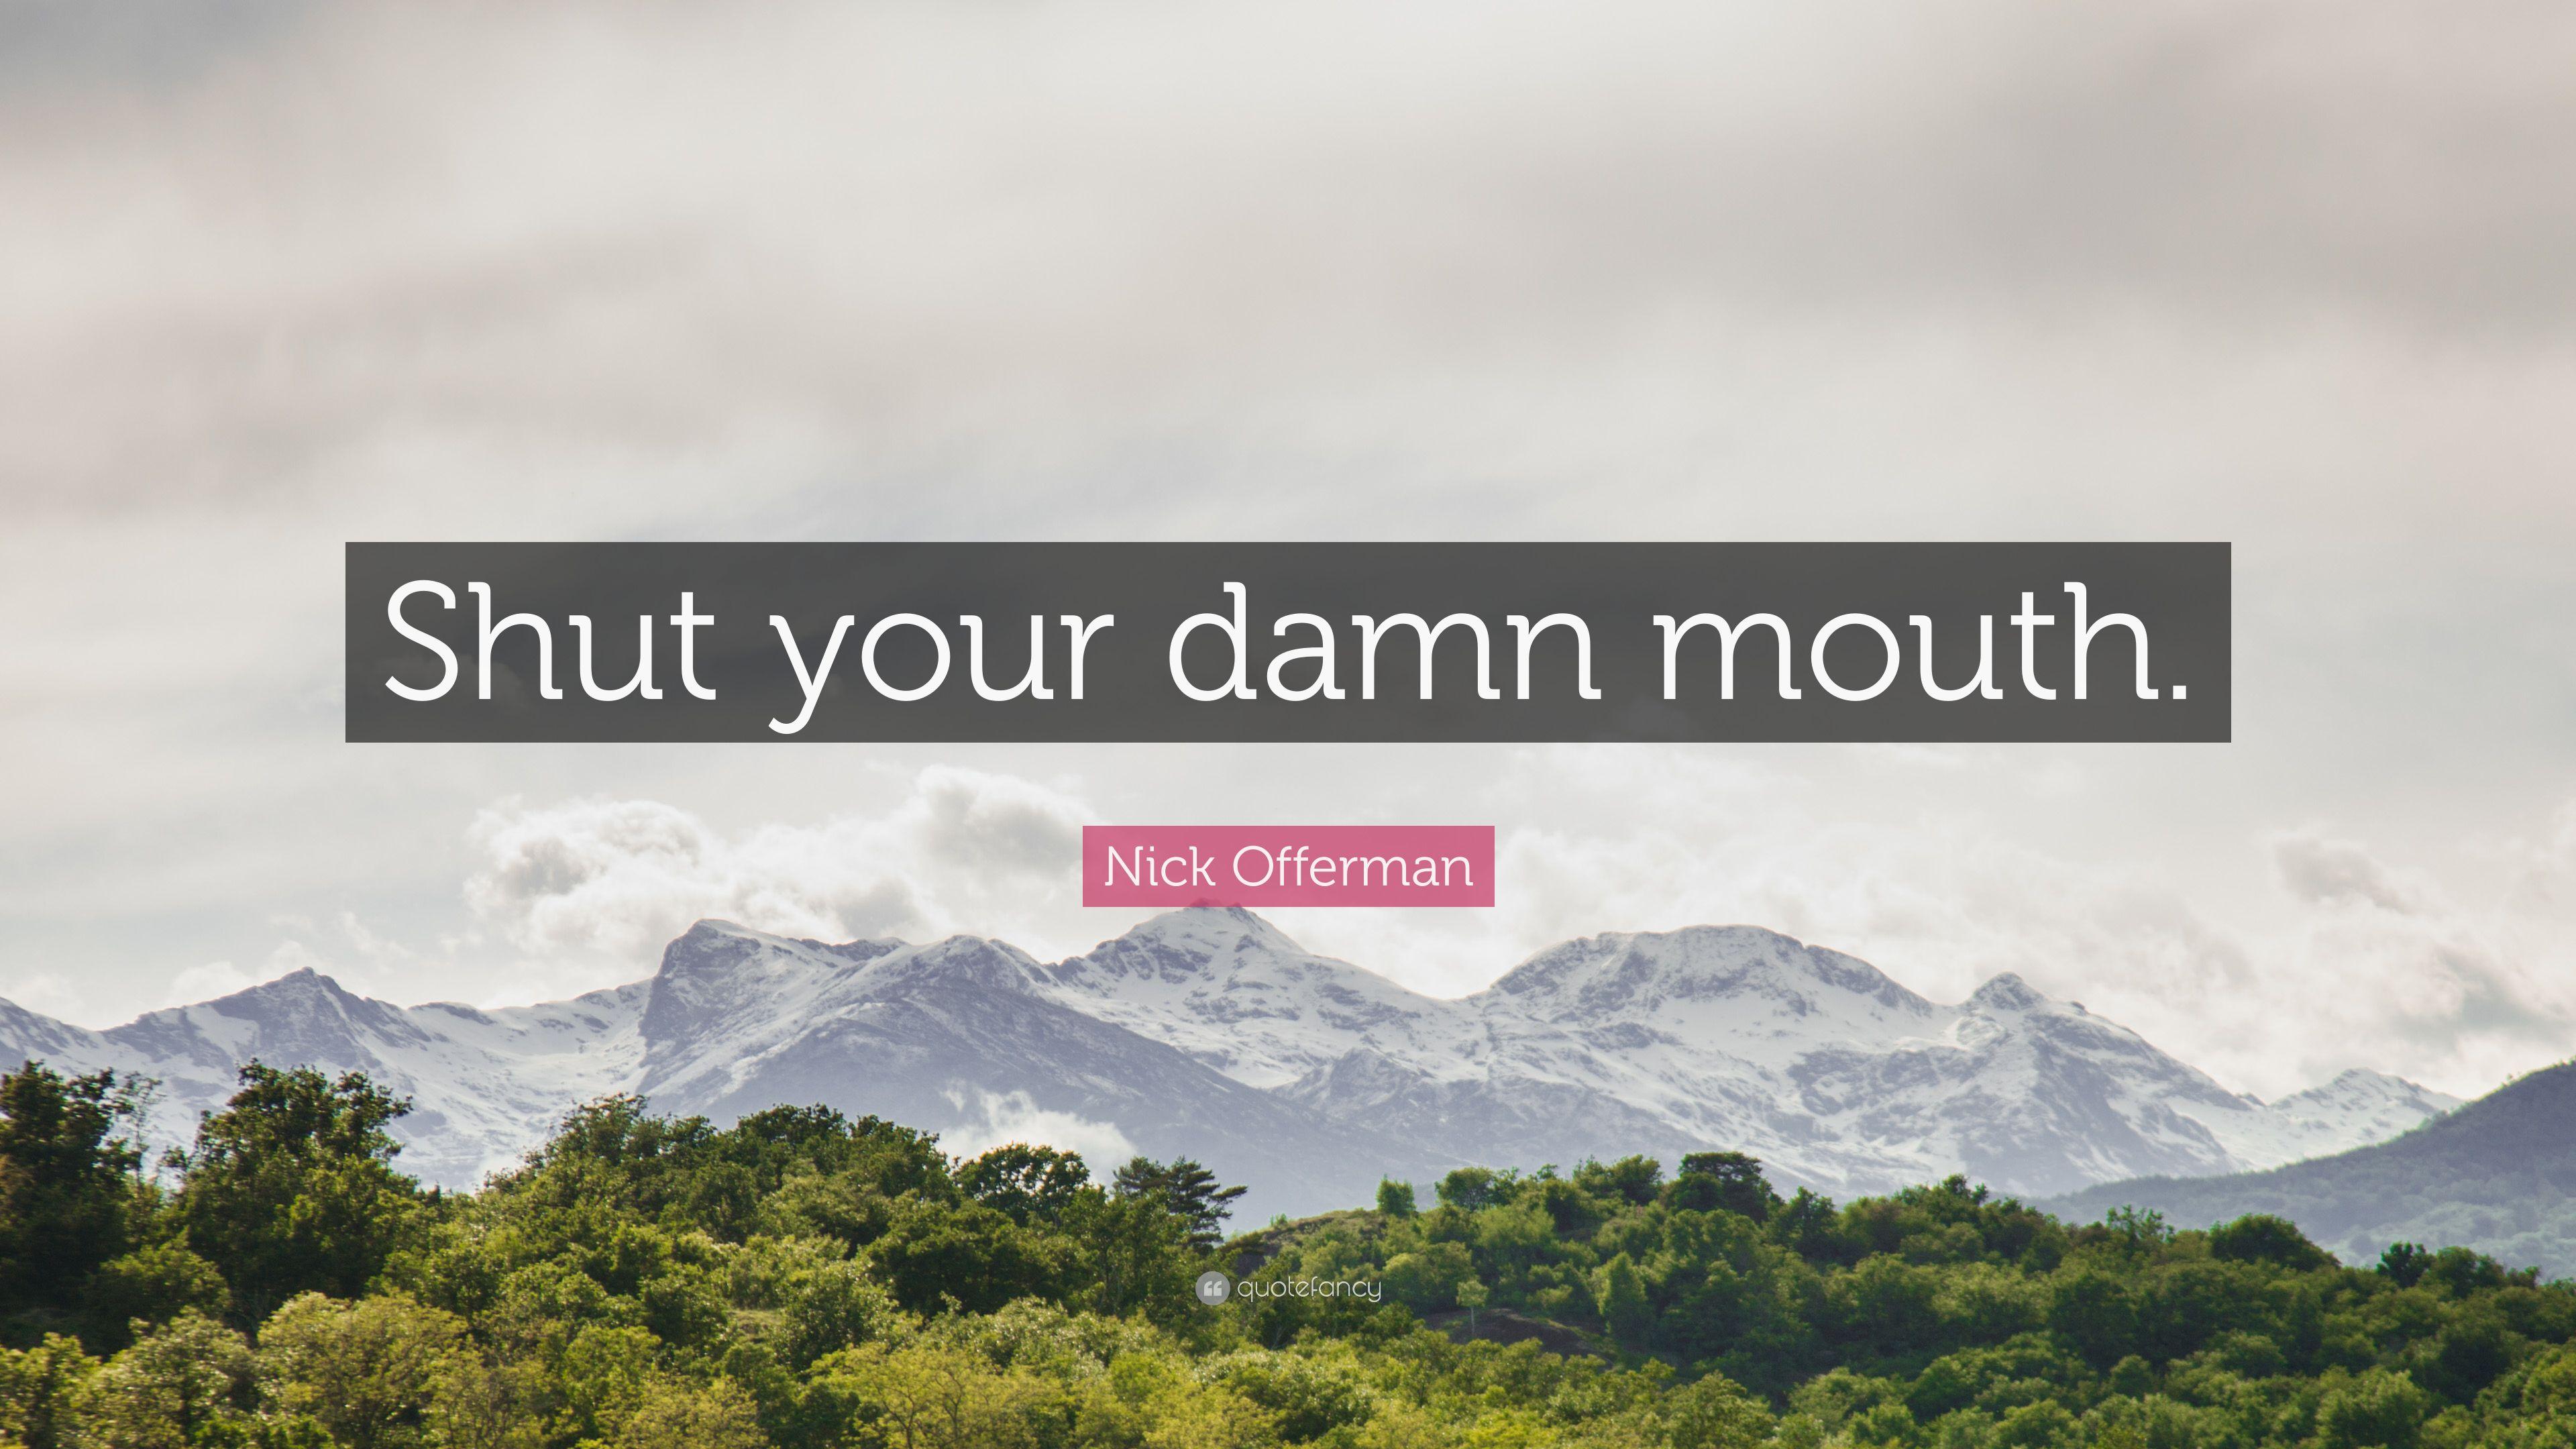 Nick Offerman Quote: “Shut your damn mouth.” (7 wallpaper)